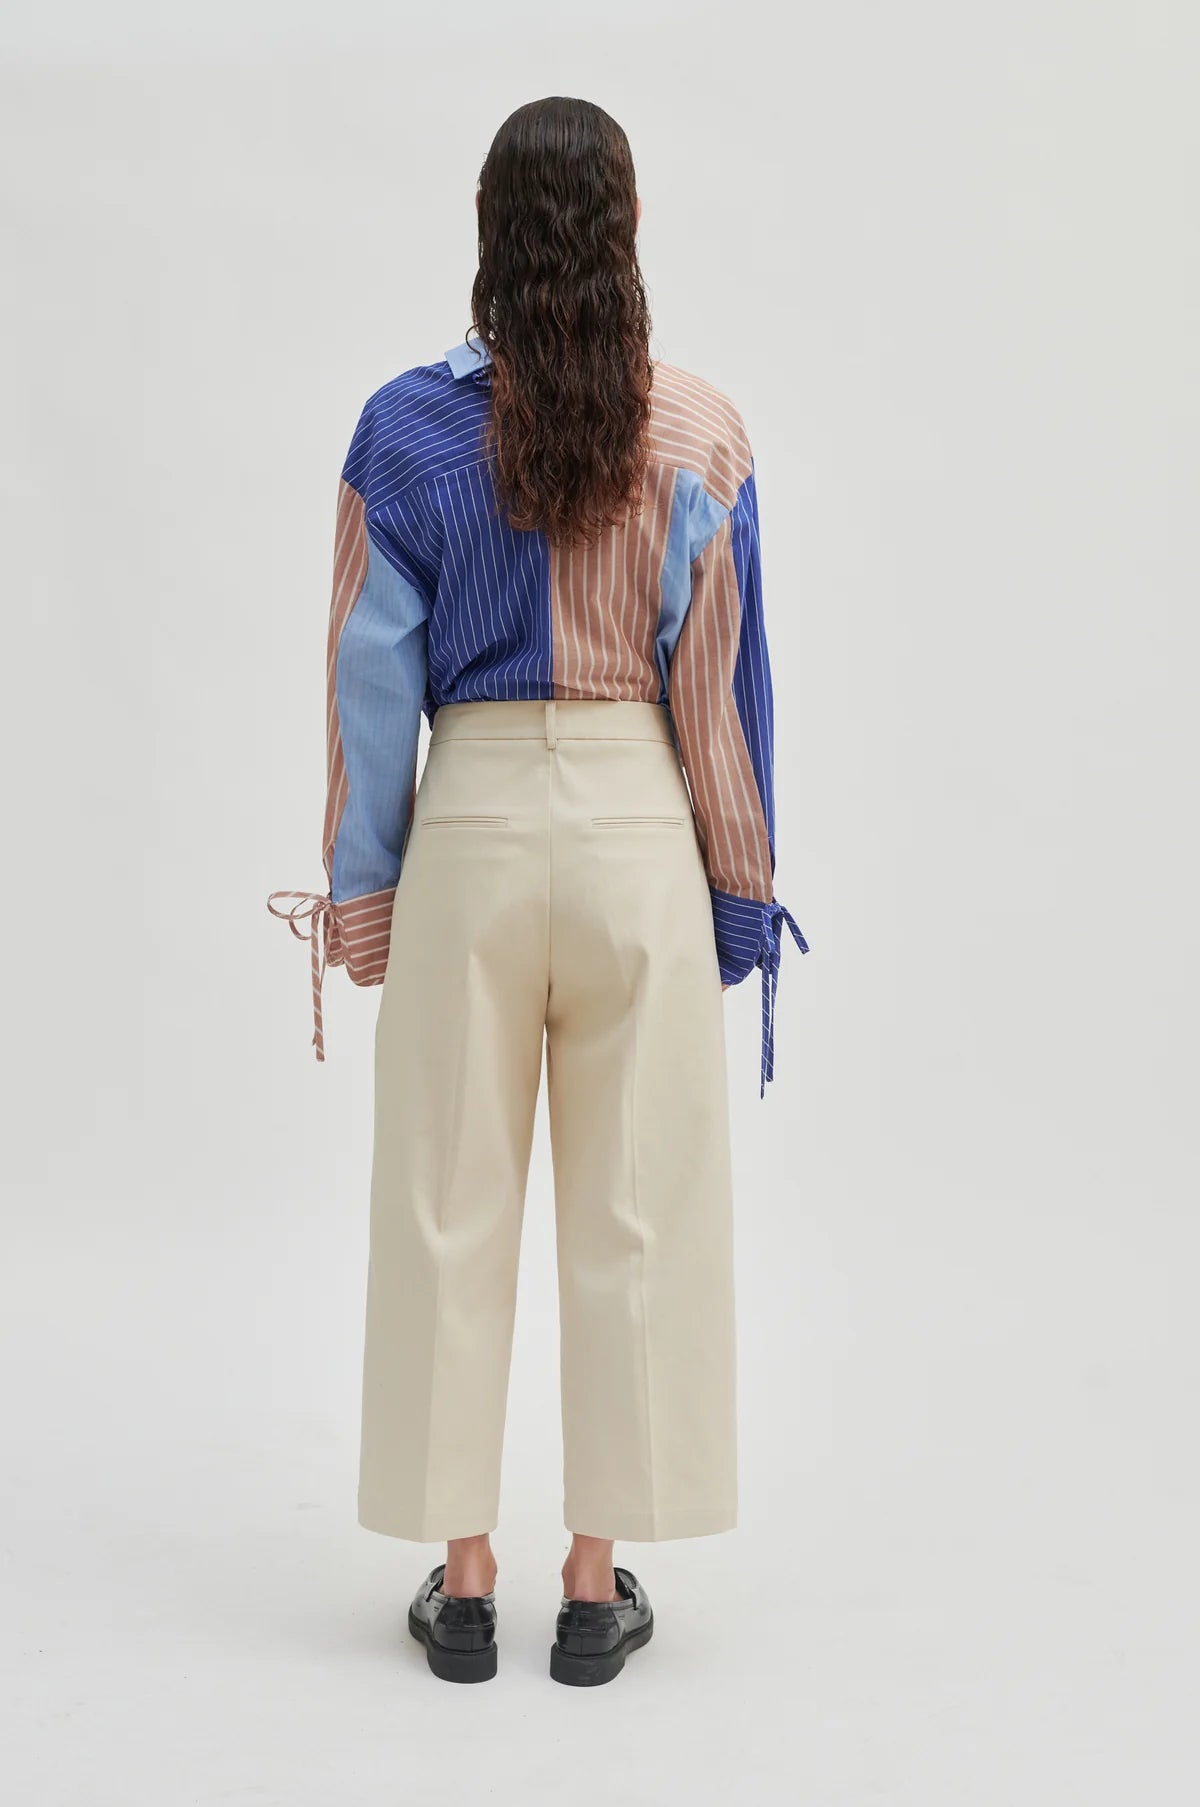 Blossom Cropped Trousers